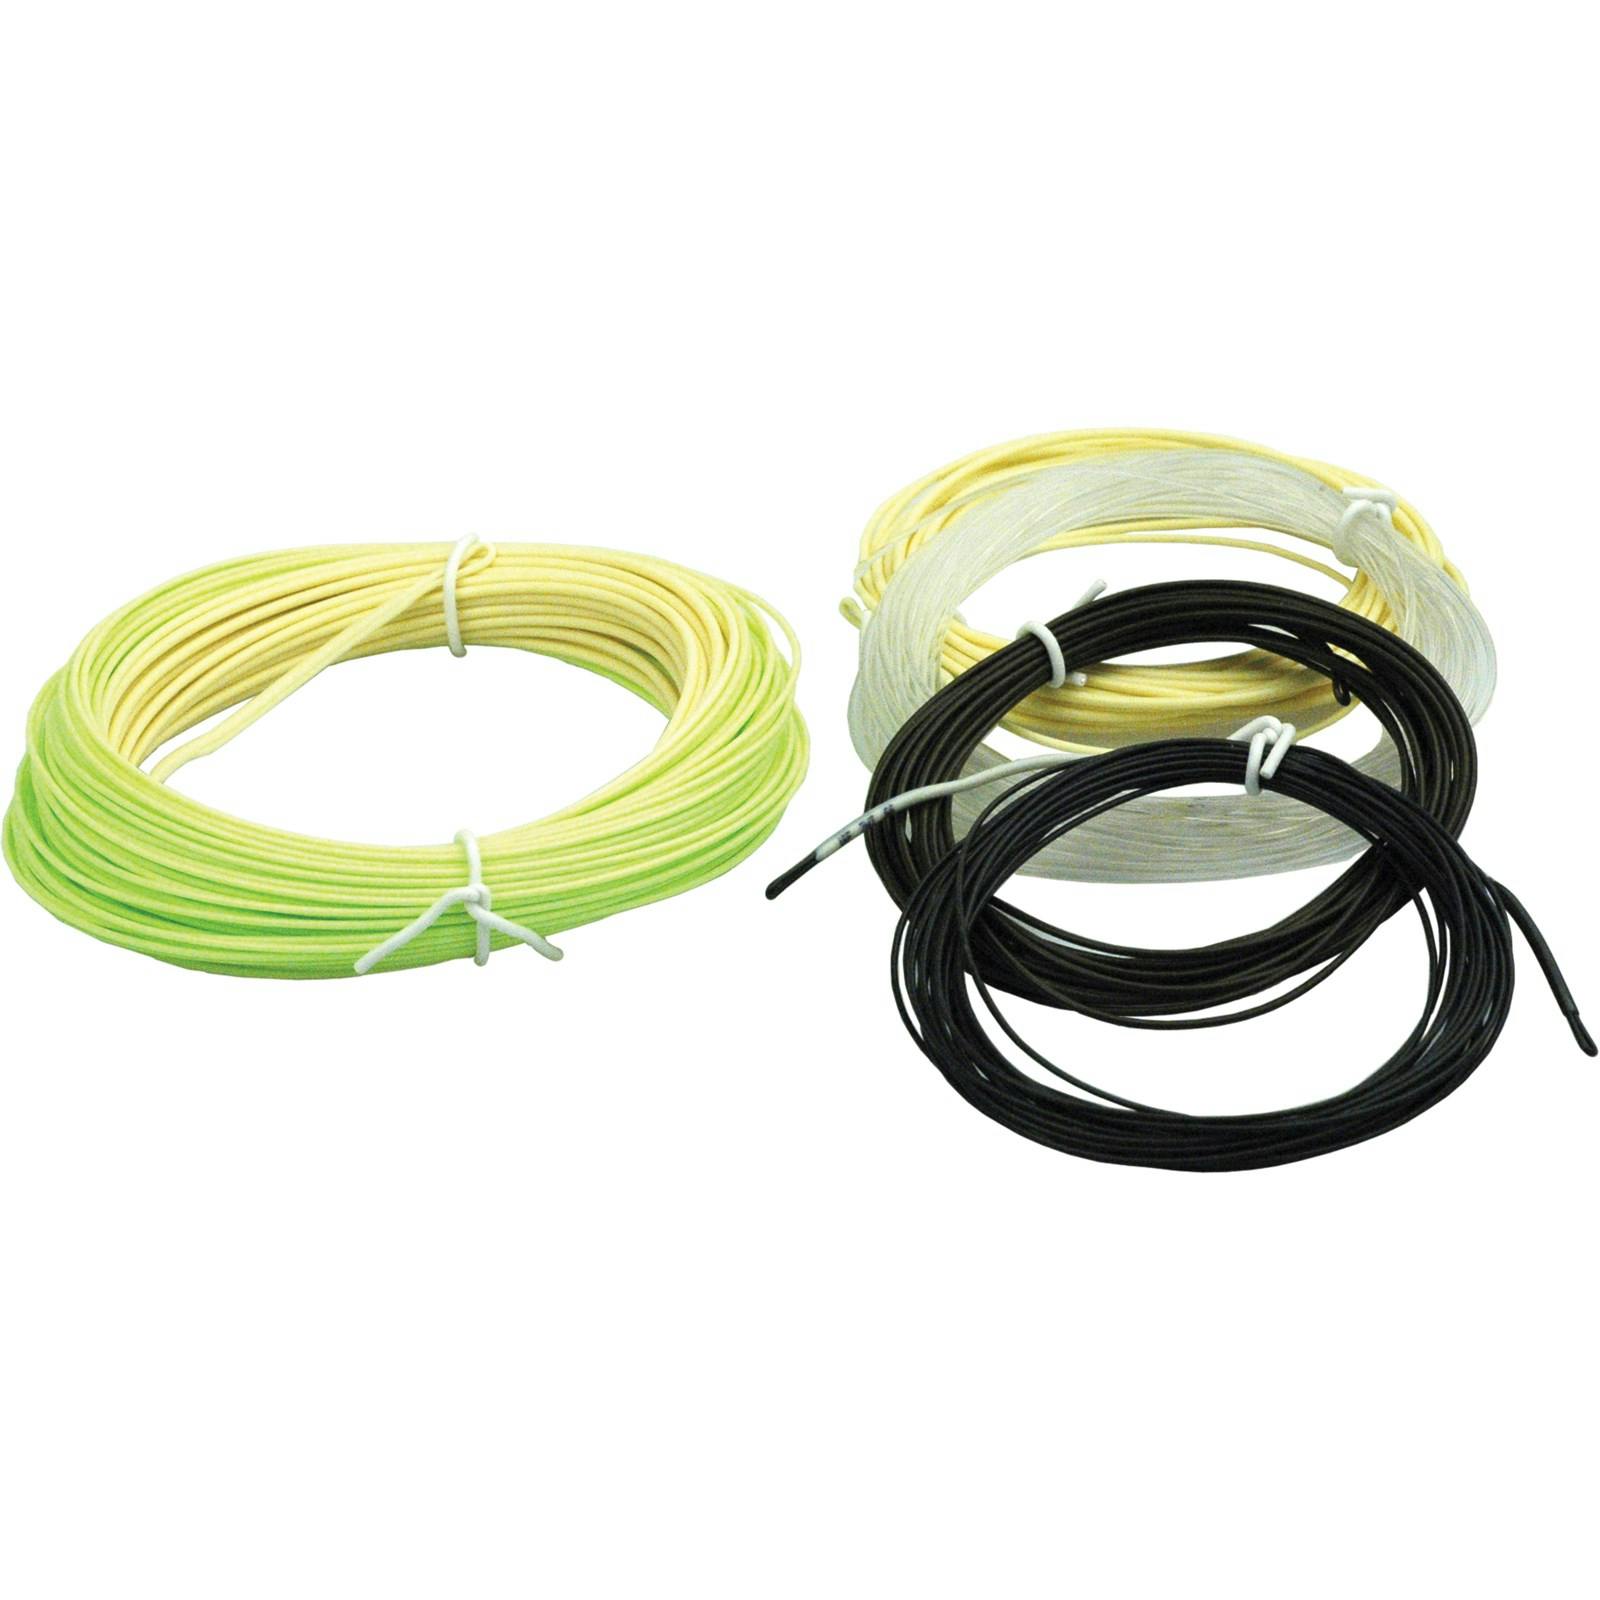 Rio Freshwater Sink Tip Series Intouch Versitip II Fly Line · WF · 8wt · Floating · Straw - Light Green